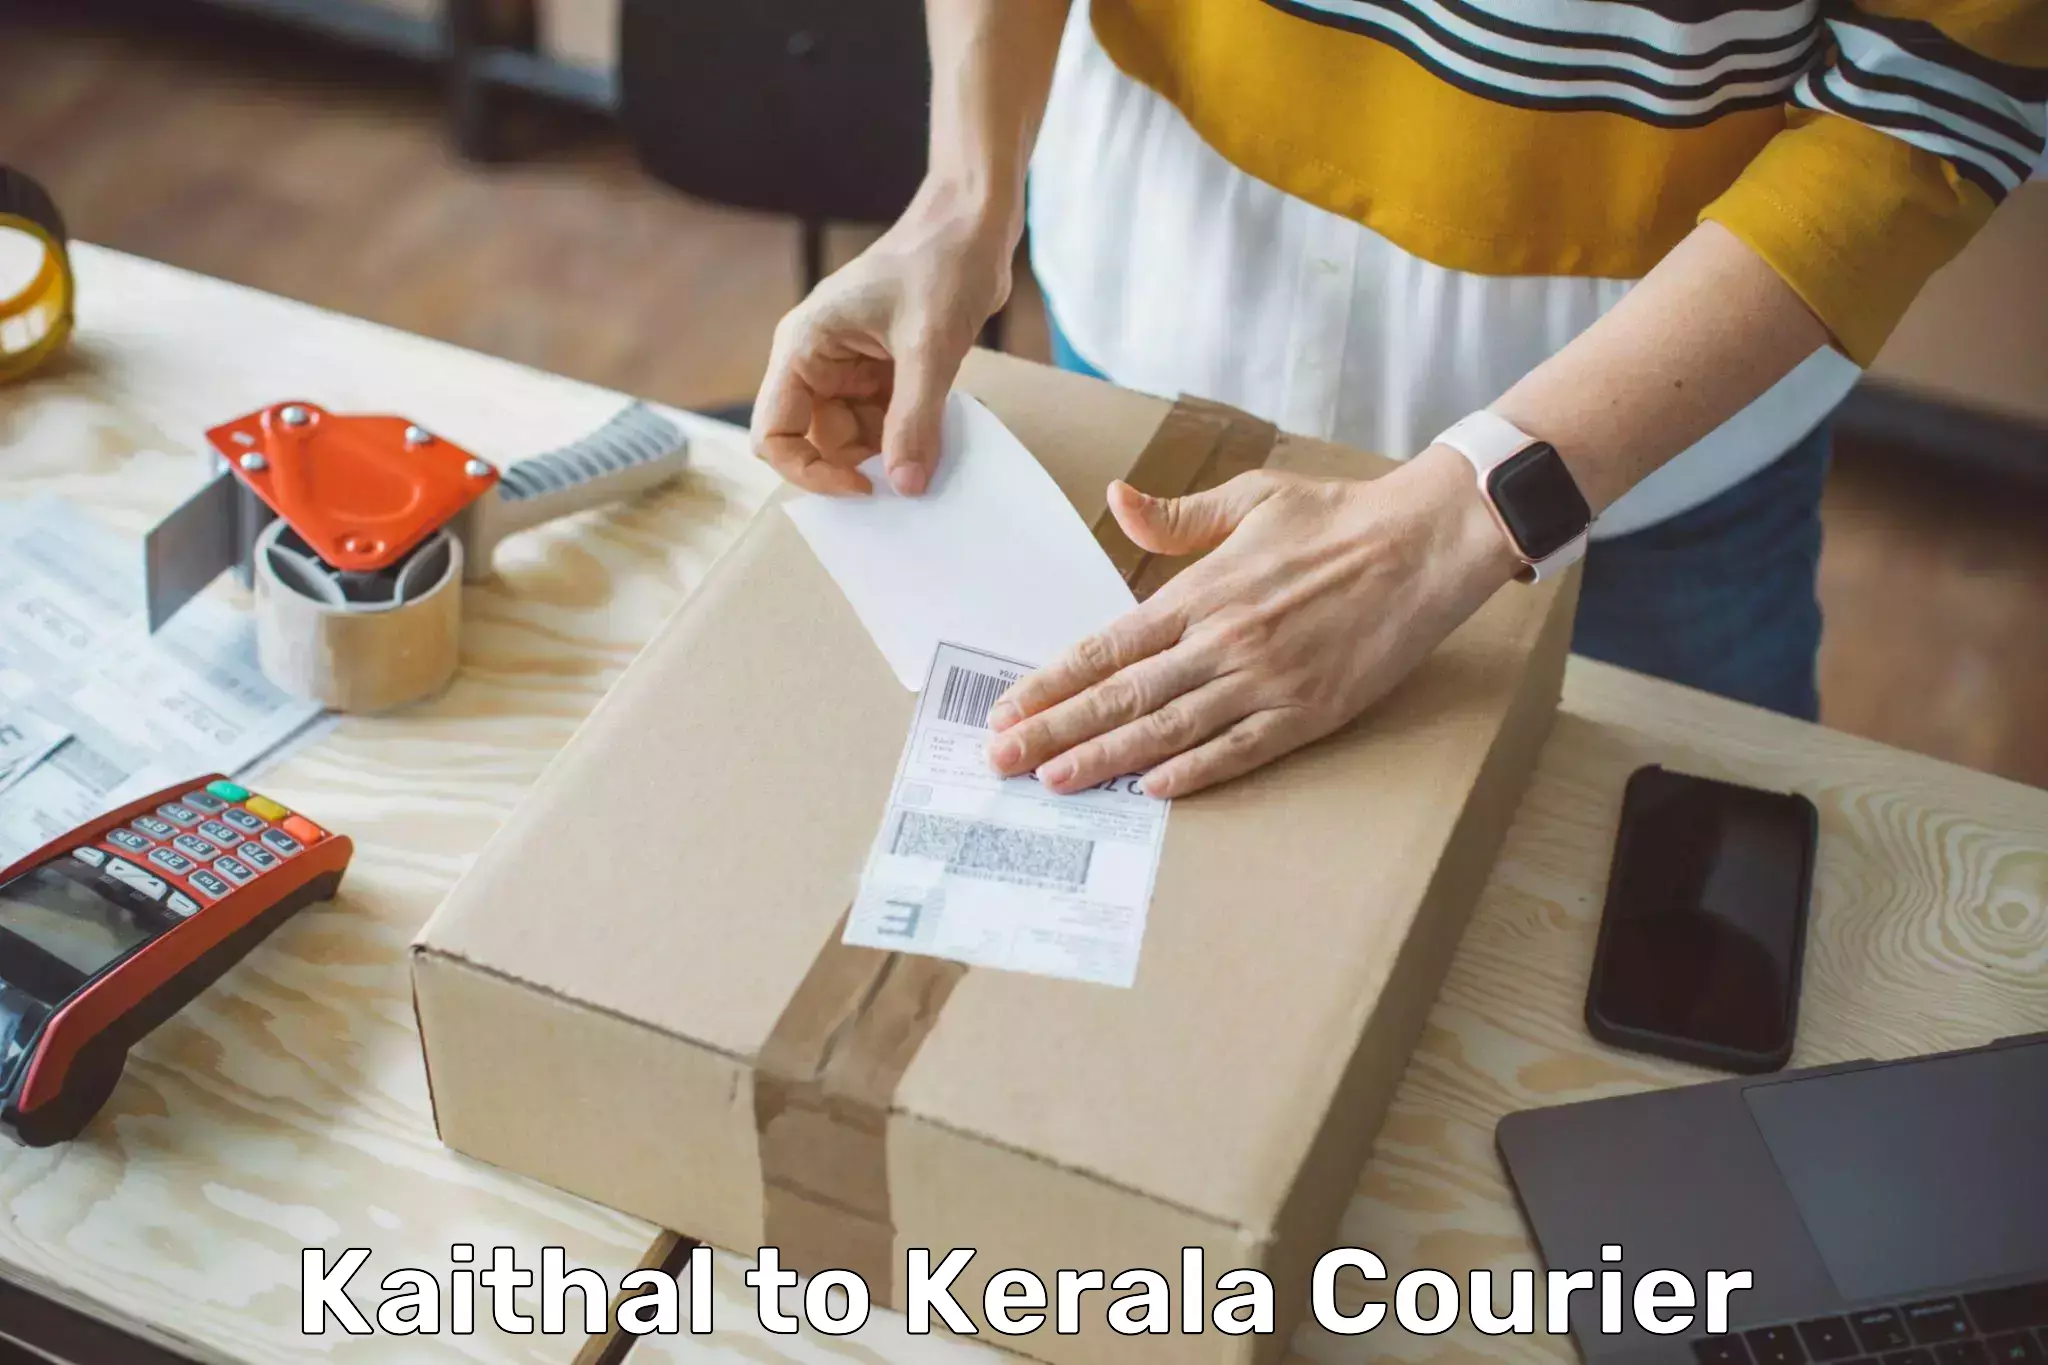 High-speed parcel service Kaithal to Kerala